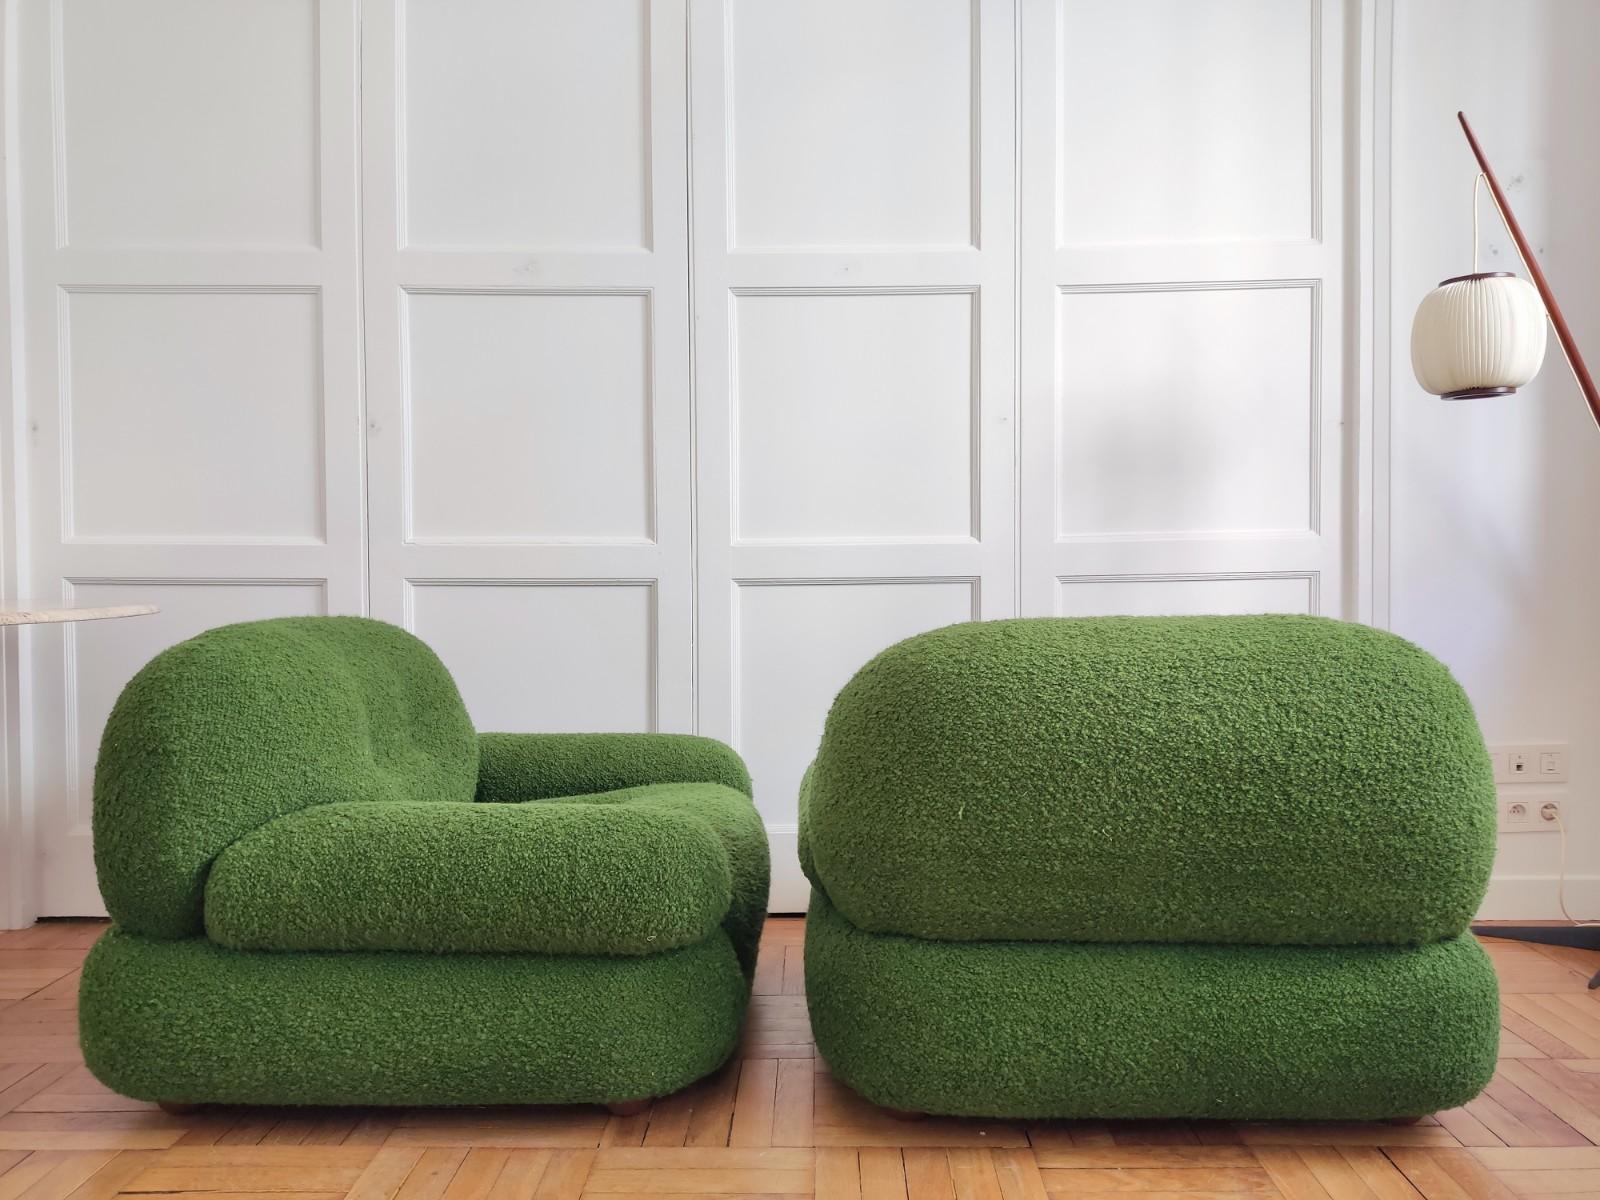 Set of 2 Italian armchairs designed by Sapporo for Mobil Girgi.
These armchairs are completely restored in a green textured fabric from Designers Guild.
Chic and very representative of the glamorous design period of the 1970s in Italy
Extremely